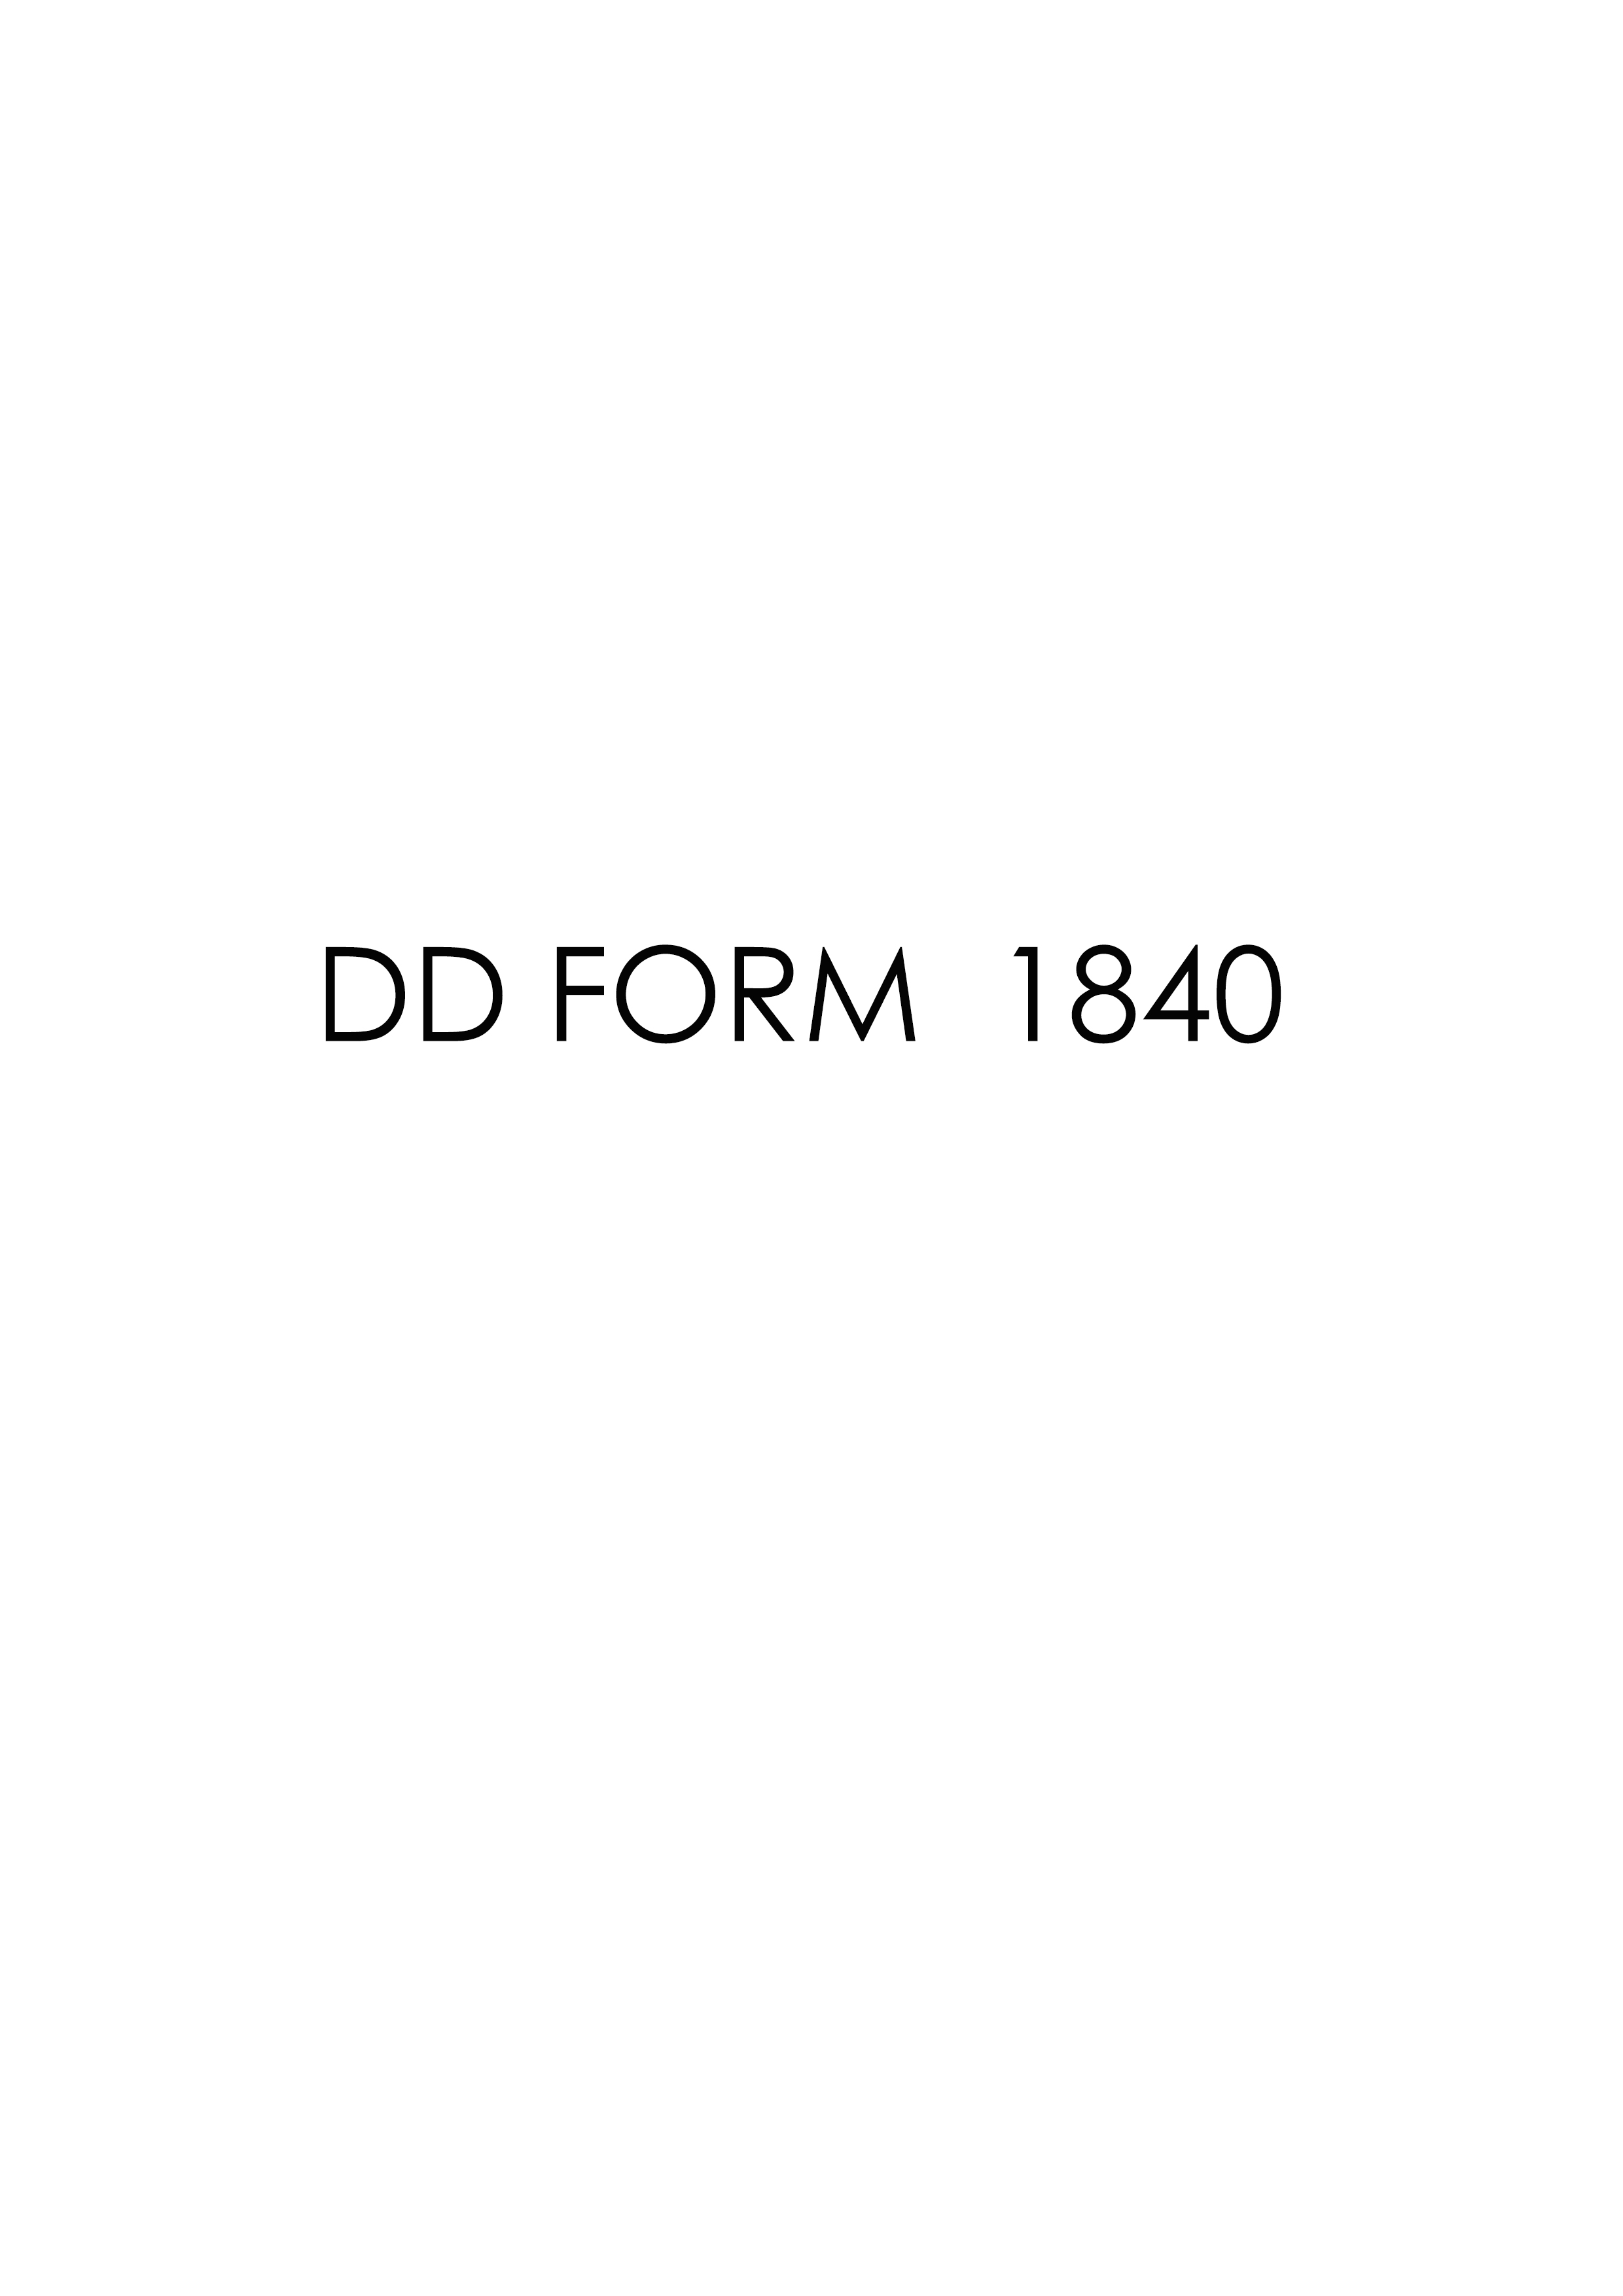 Download Fillable dd Form 1840